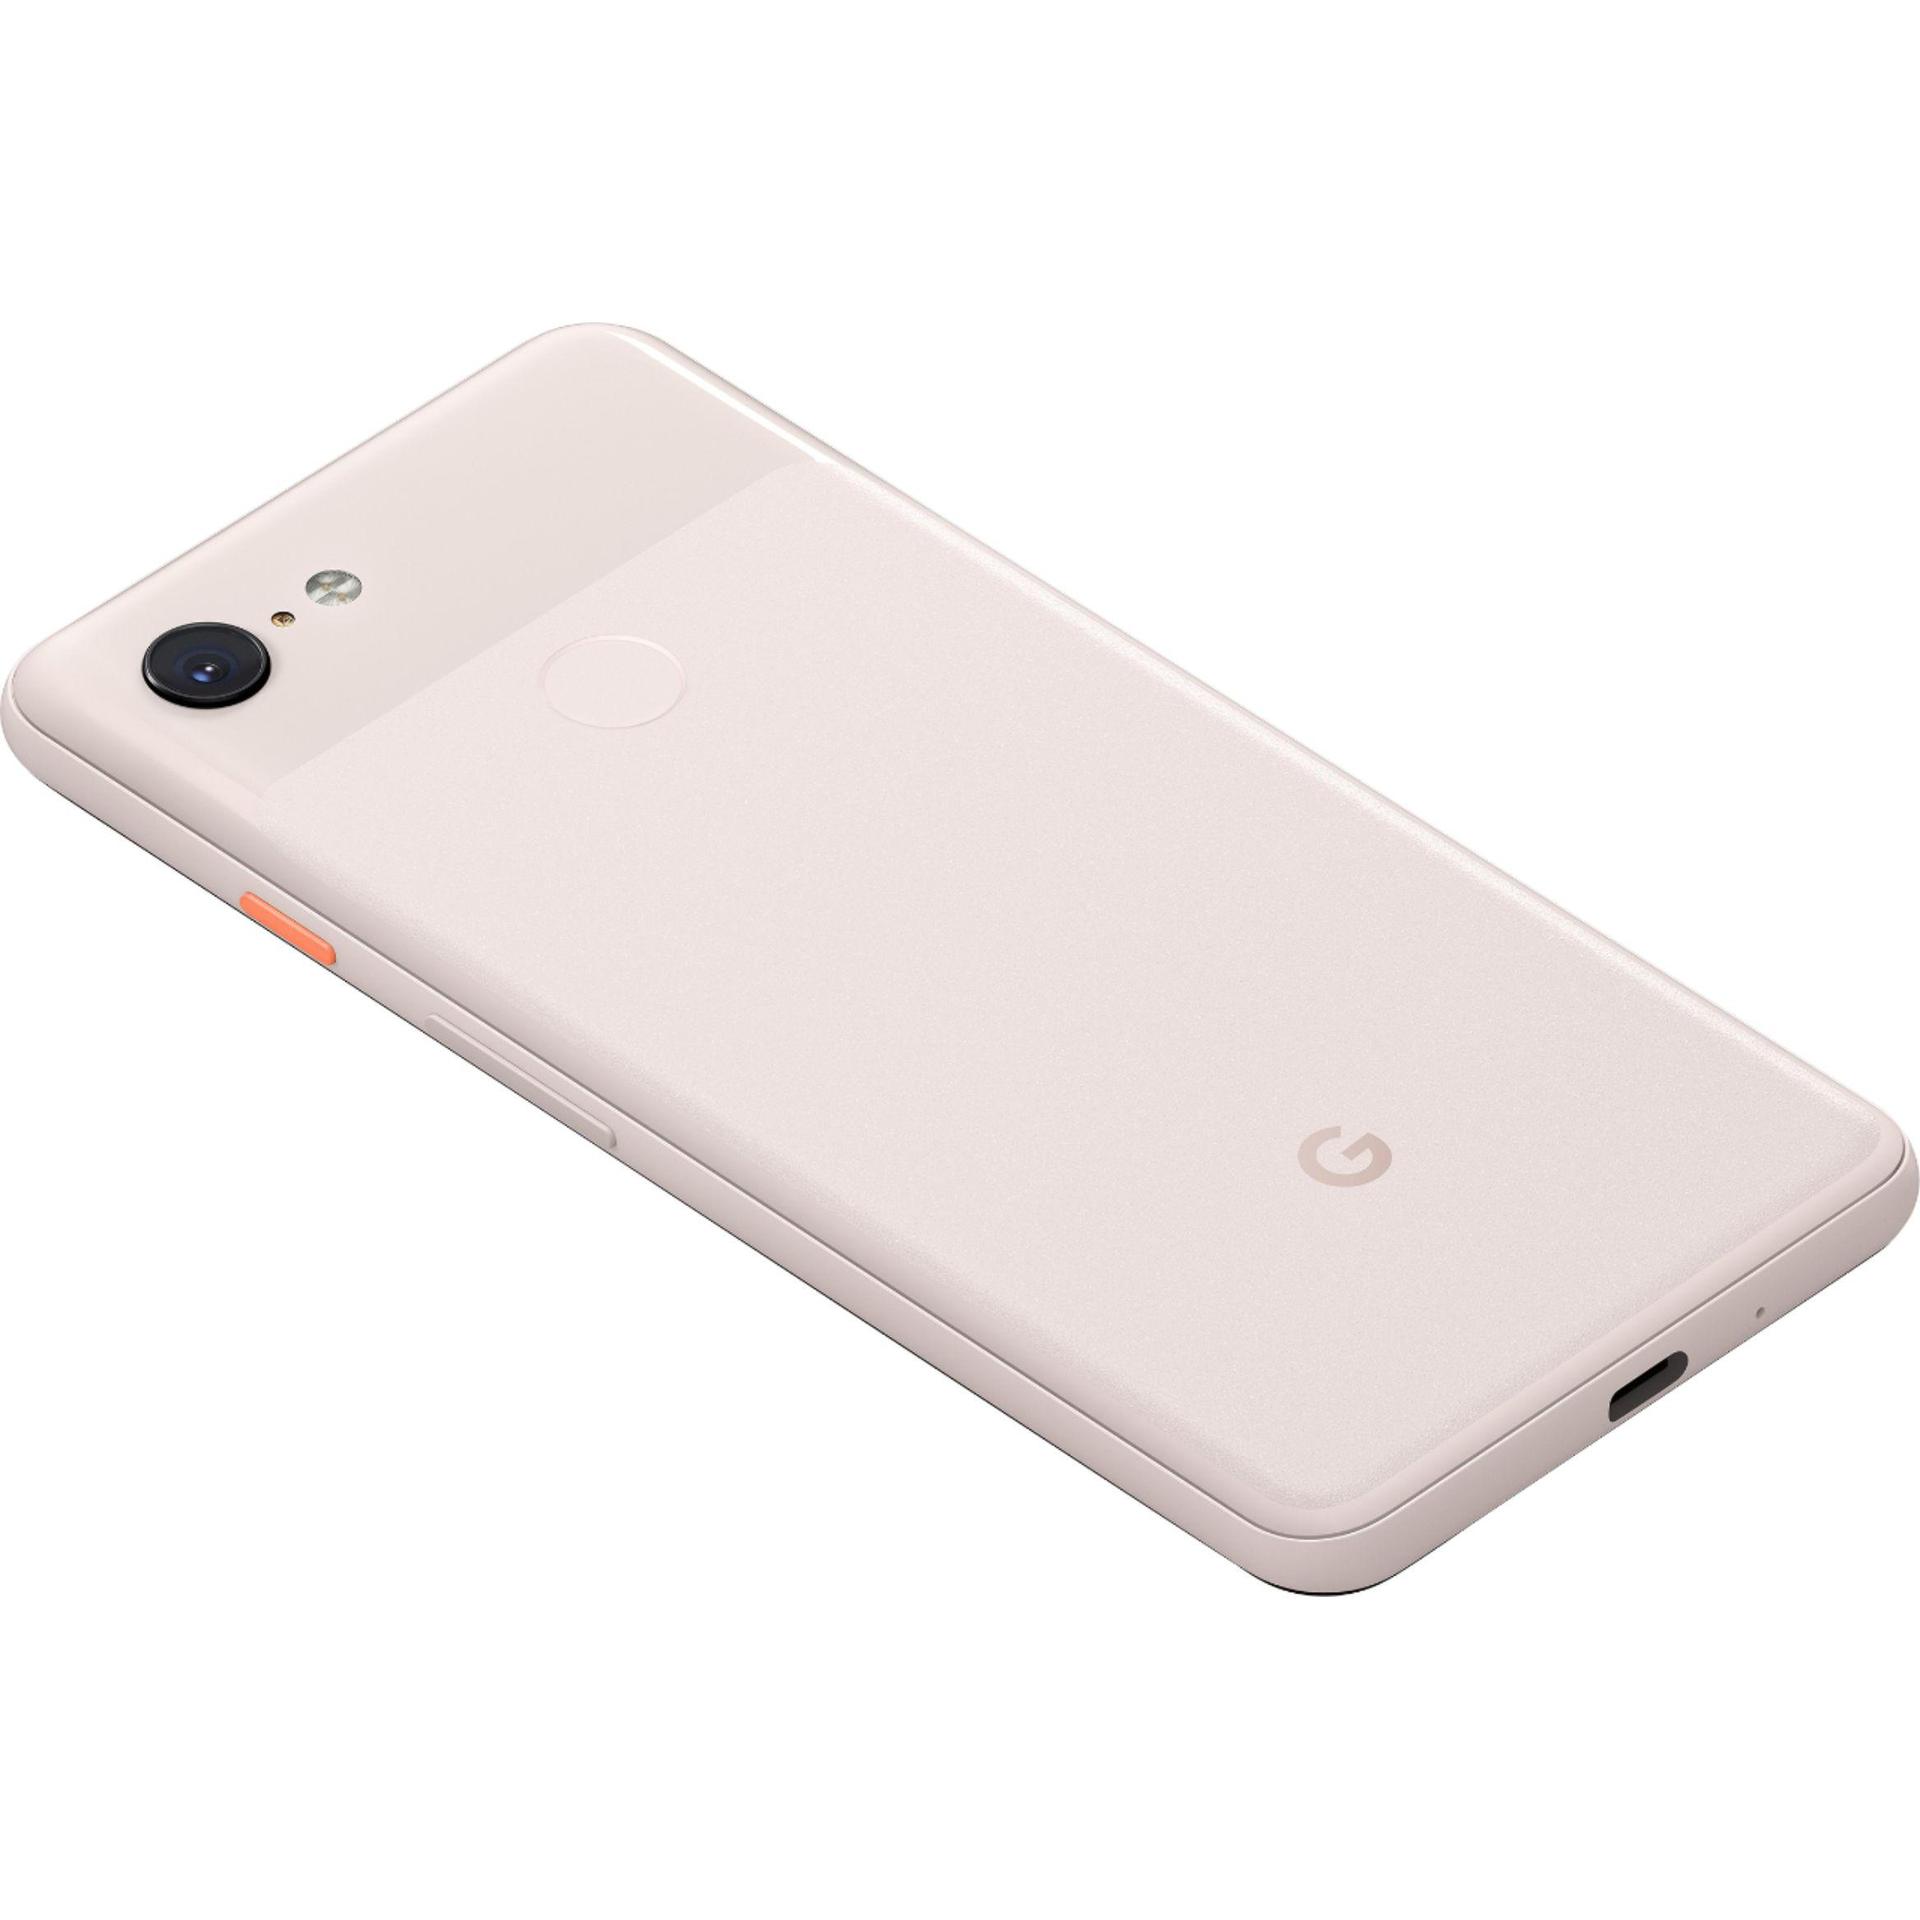 Google Pixel 3XL 64GB Pink (Unlocked) Great Condition - image 2 of 3